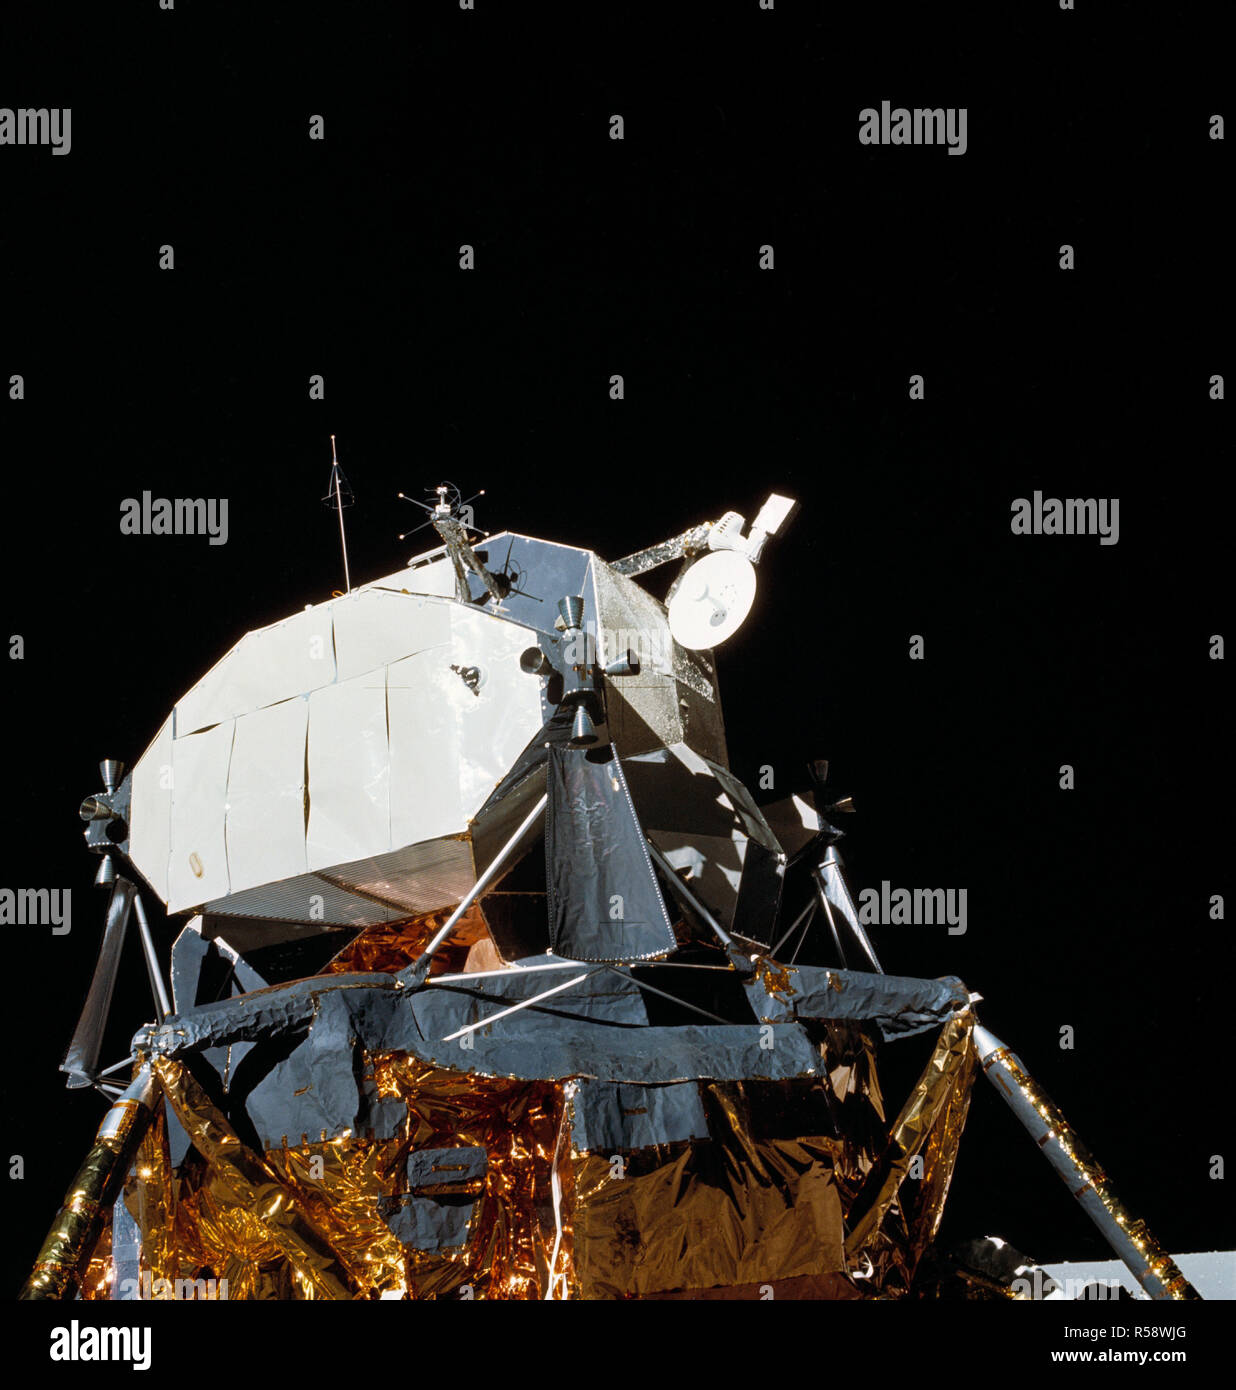 (21 April 1972) --- View of the Lunar Module (LM) "Orion" parked on the lunar surface. During their post mission press conference, the Apollo 16 crewmembers called attention to the steerable S-band antenna, which was "frozen" in a yaw axis during much of the flight. Stock Photo